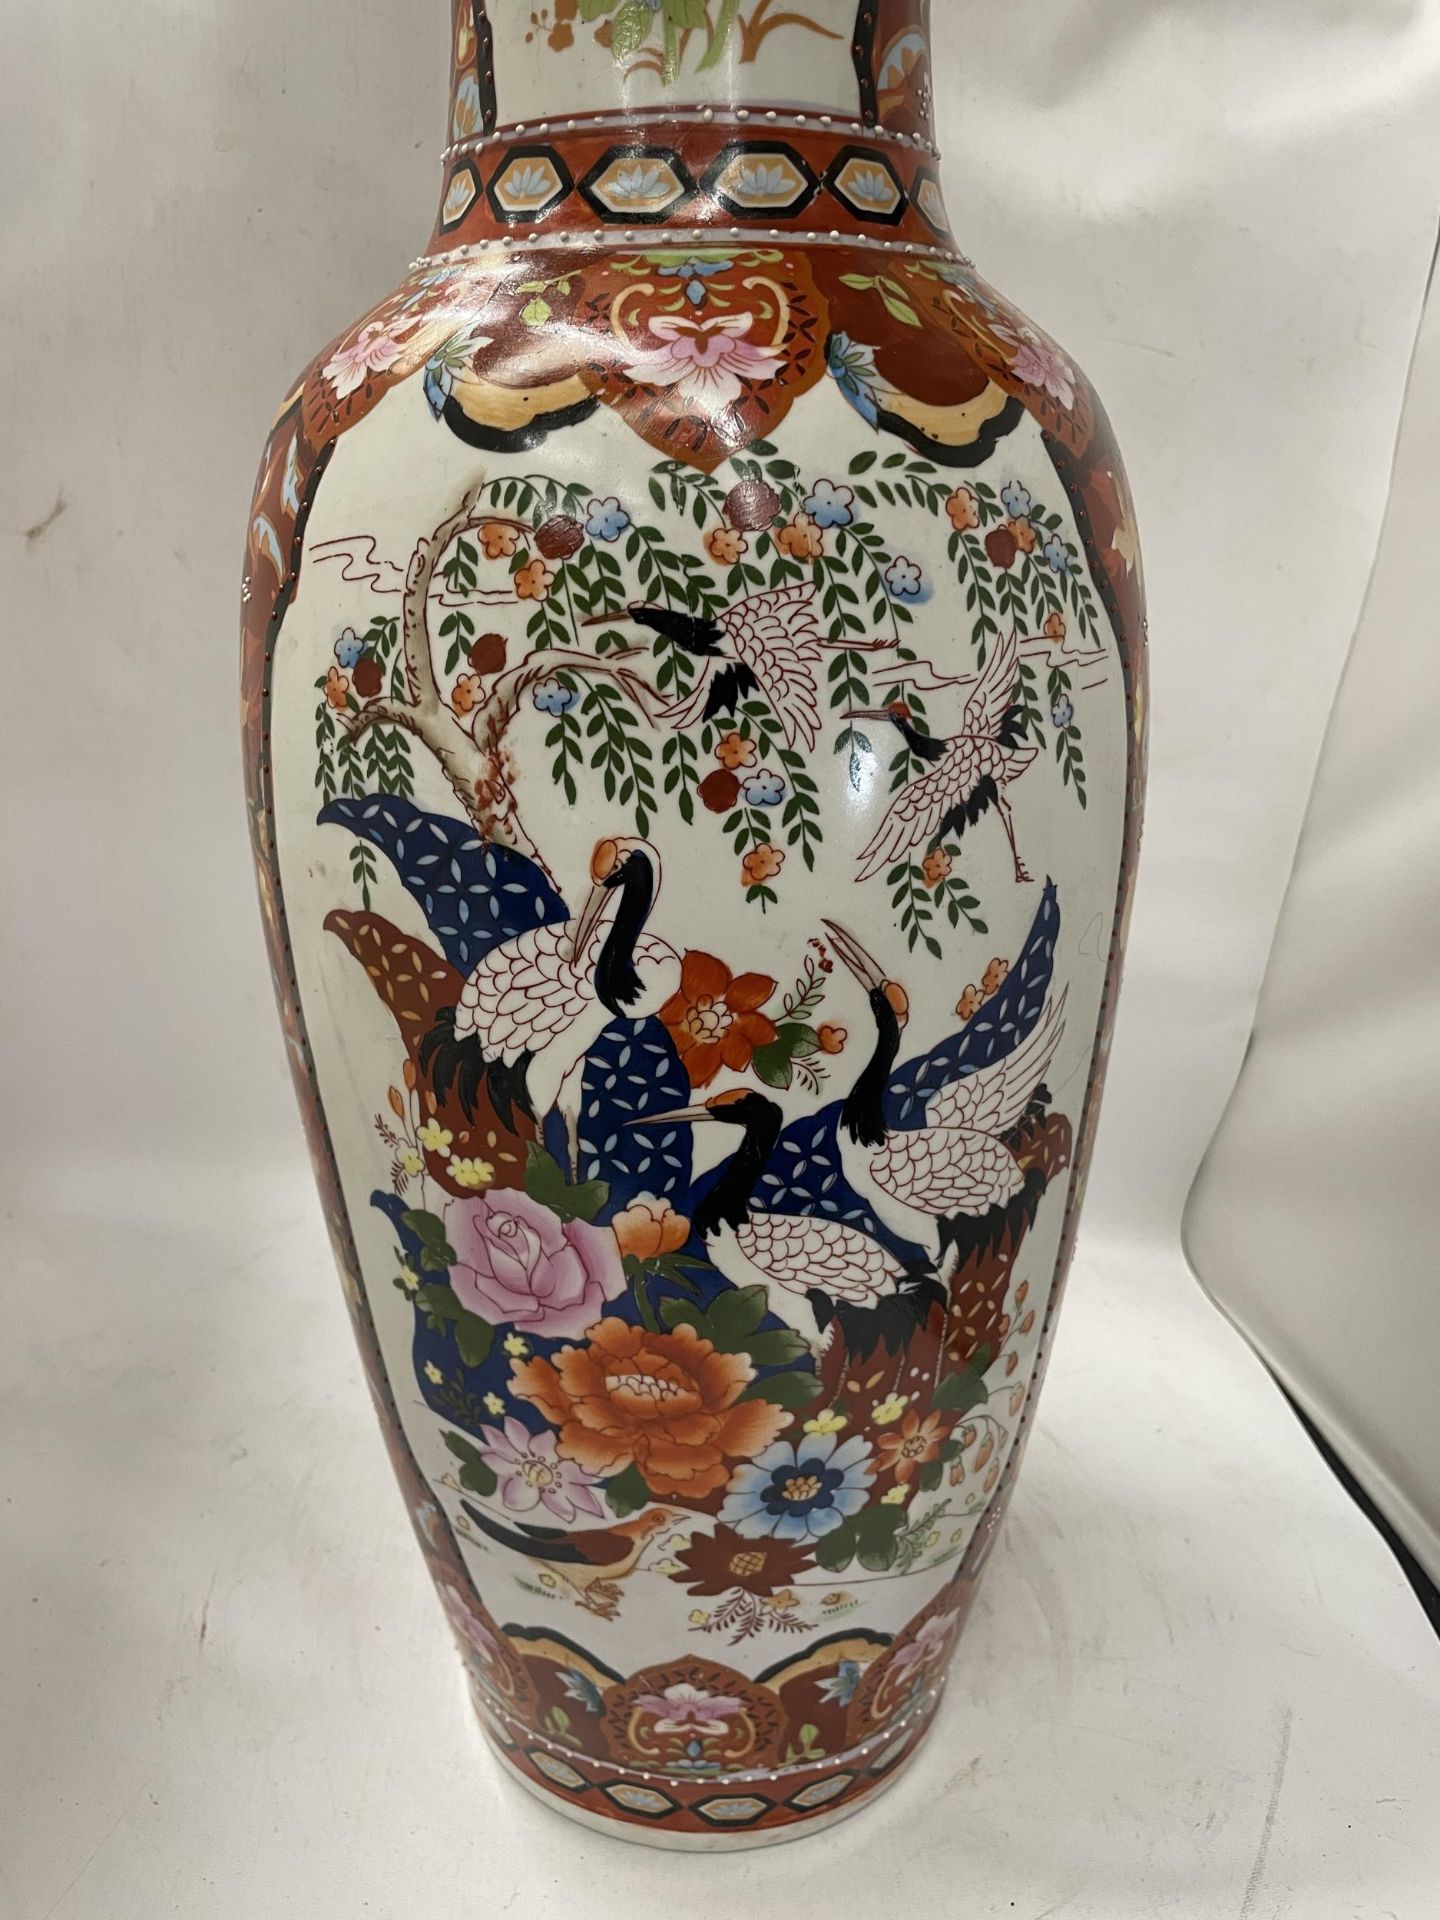 A LARGE ORIENTAL FLOOR VASE WITH HERON DESIGN, HEIGHT 60CM - Image 2 of 4